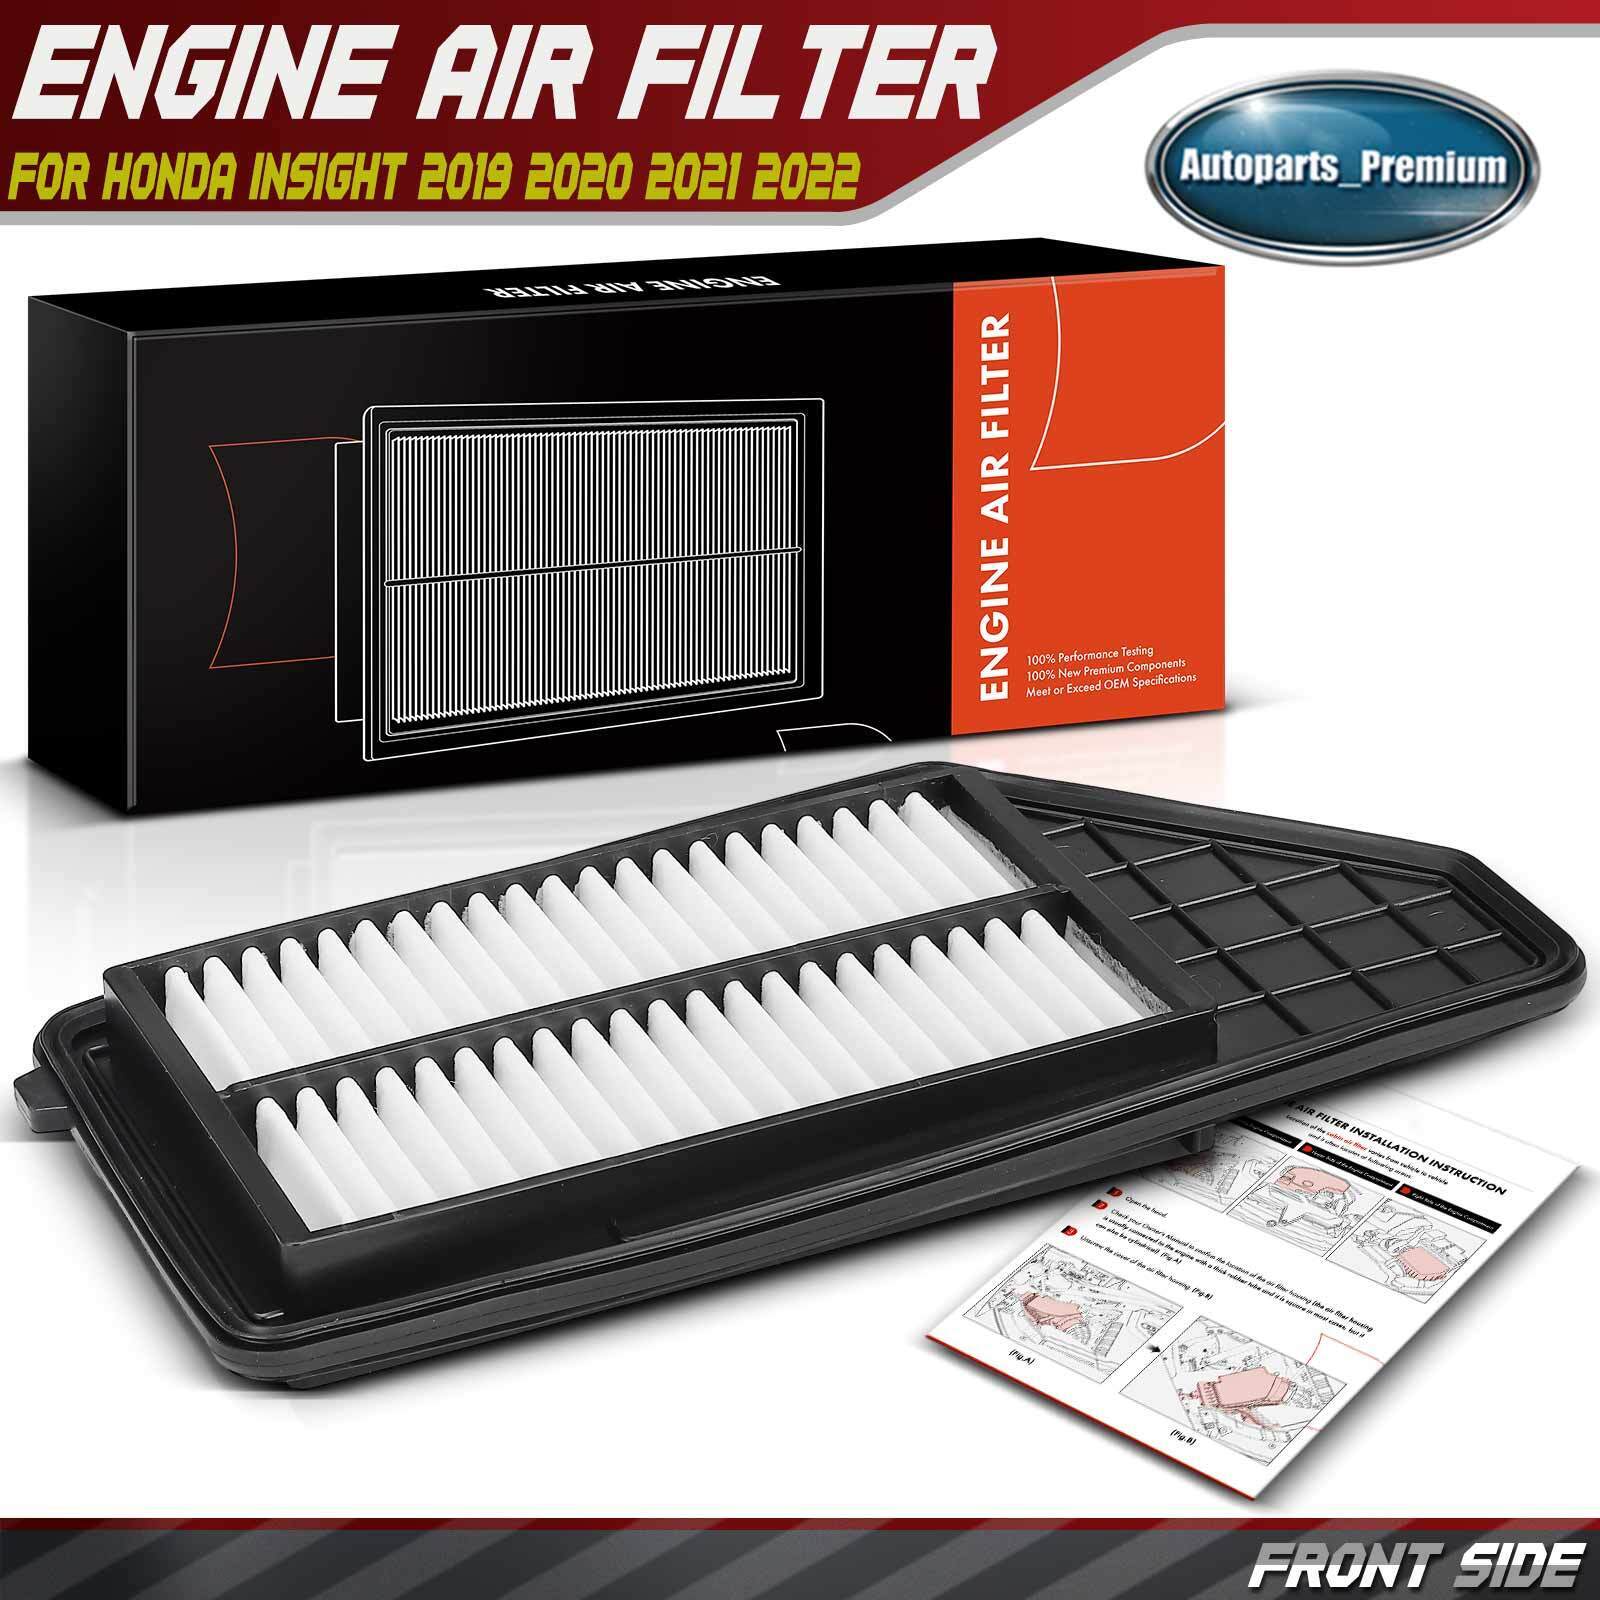 New Engine Air Filter for Honda Insight 2019 2020 2021 2022 1.5L 17220-6L2-A01